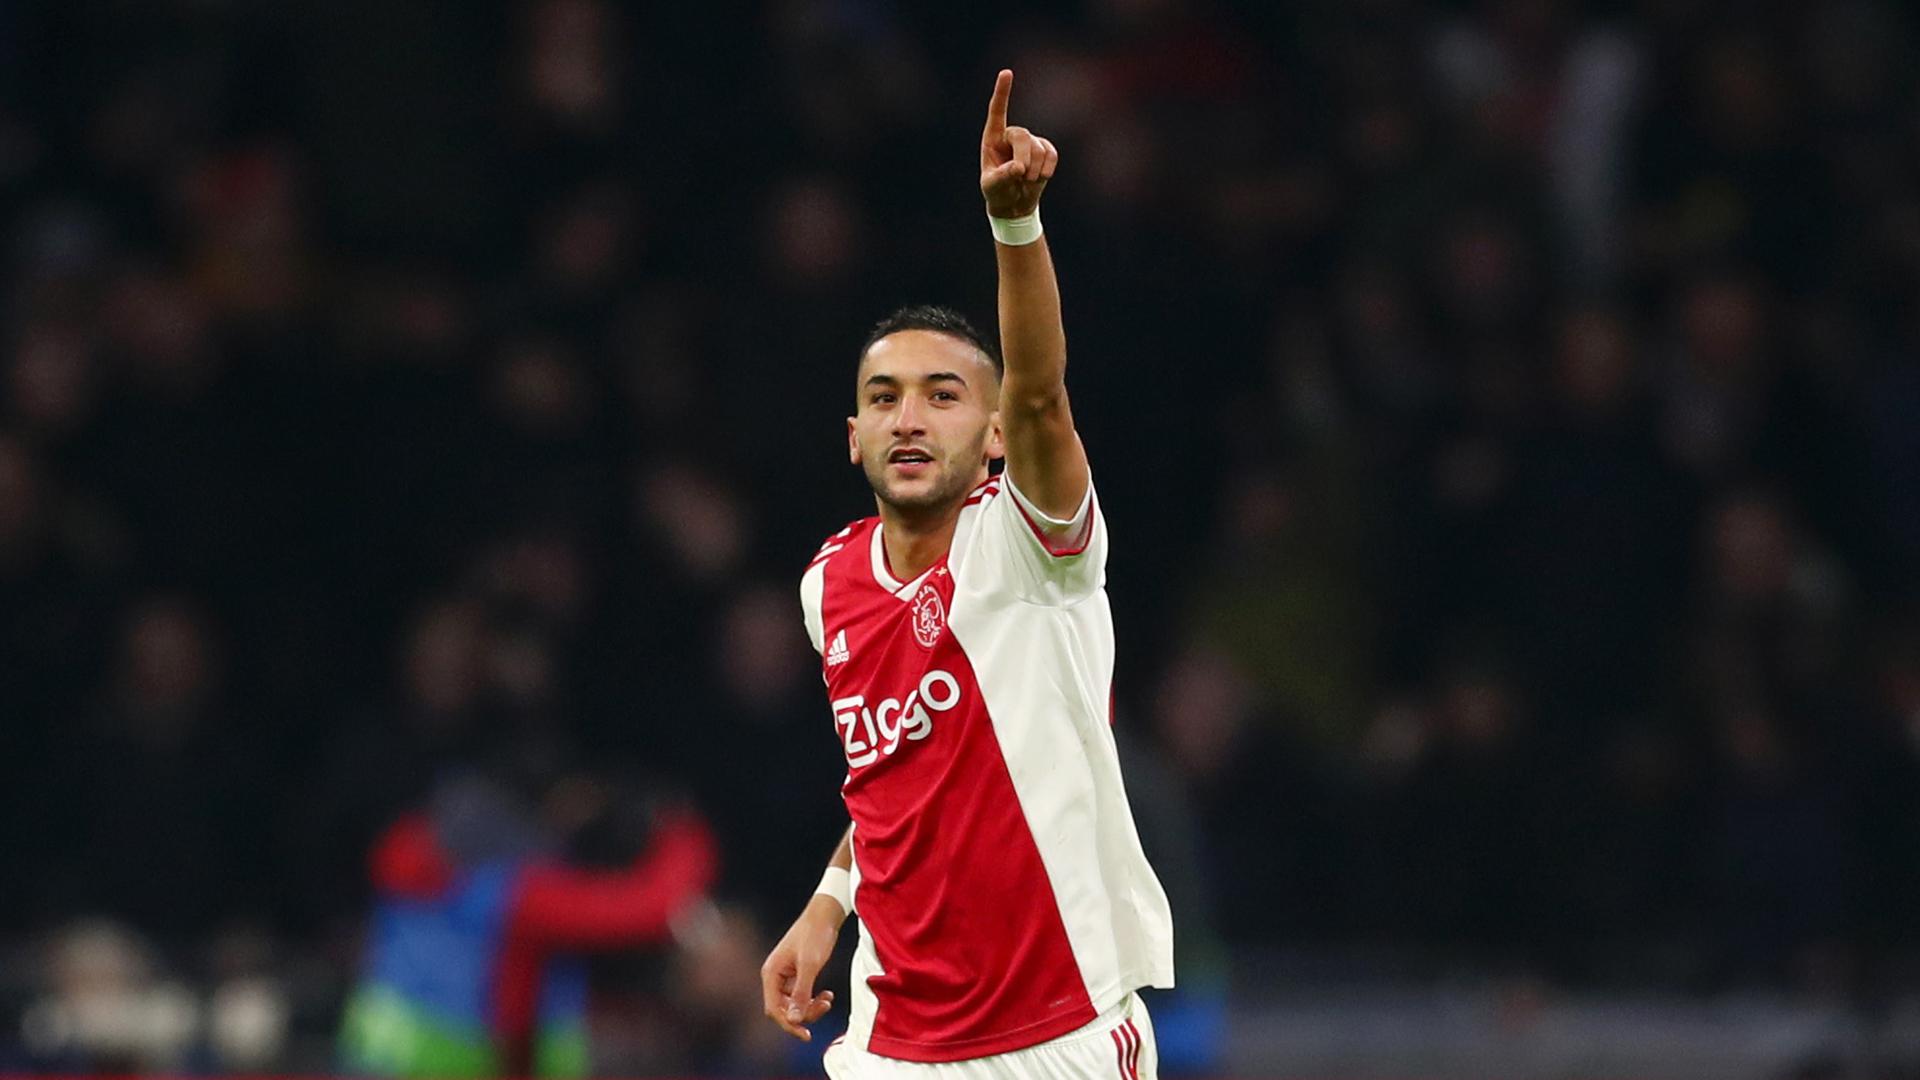 Afcon 2019 players: Hakim Ziyech Rise Of